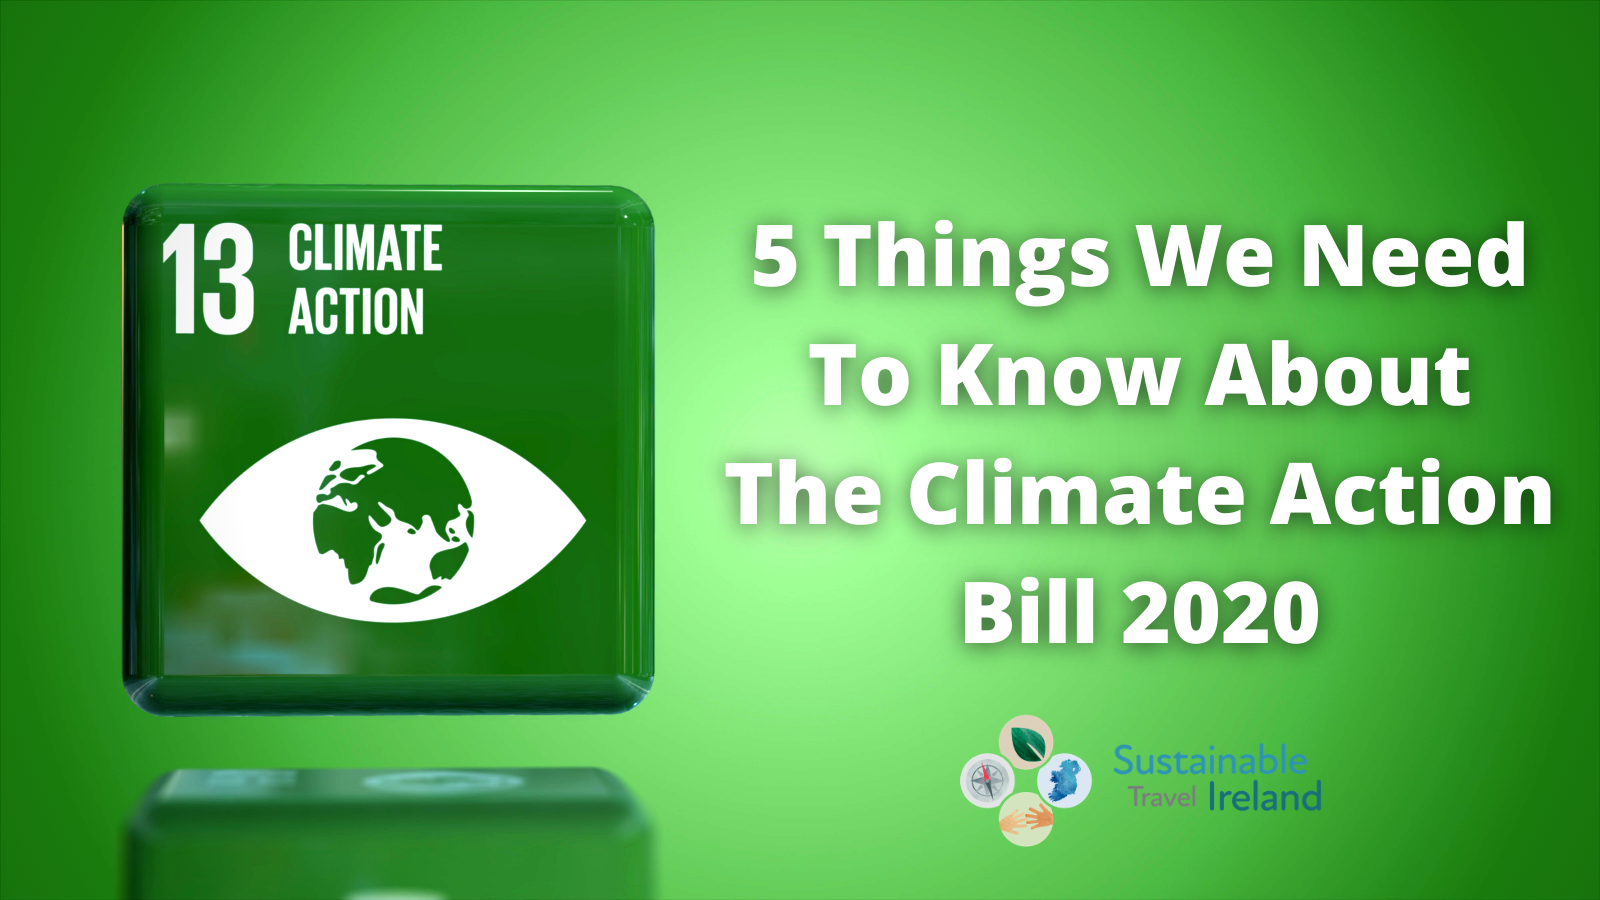 5 Things We Need To Know About The Climate Action Bill 2020